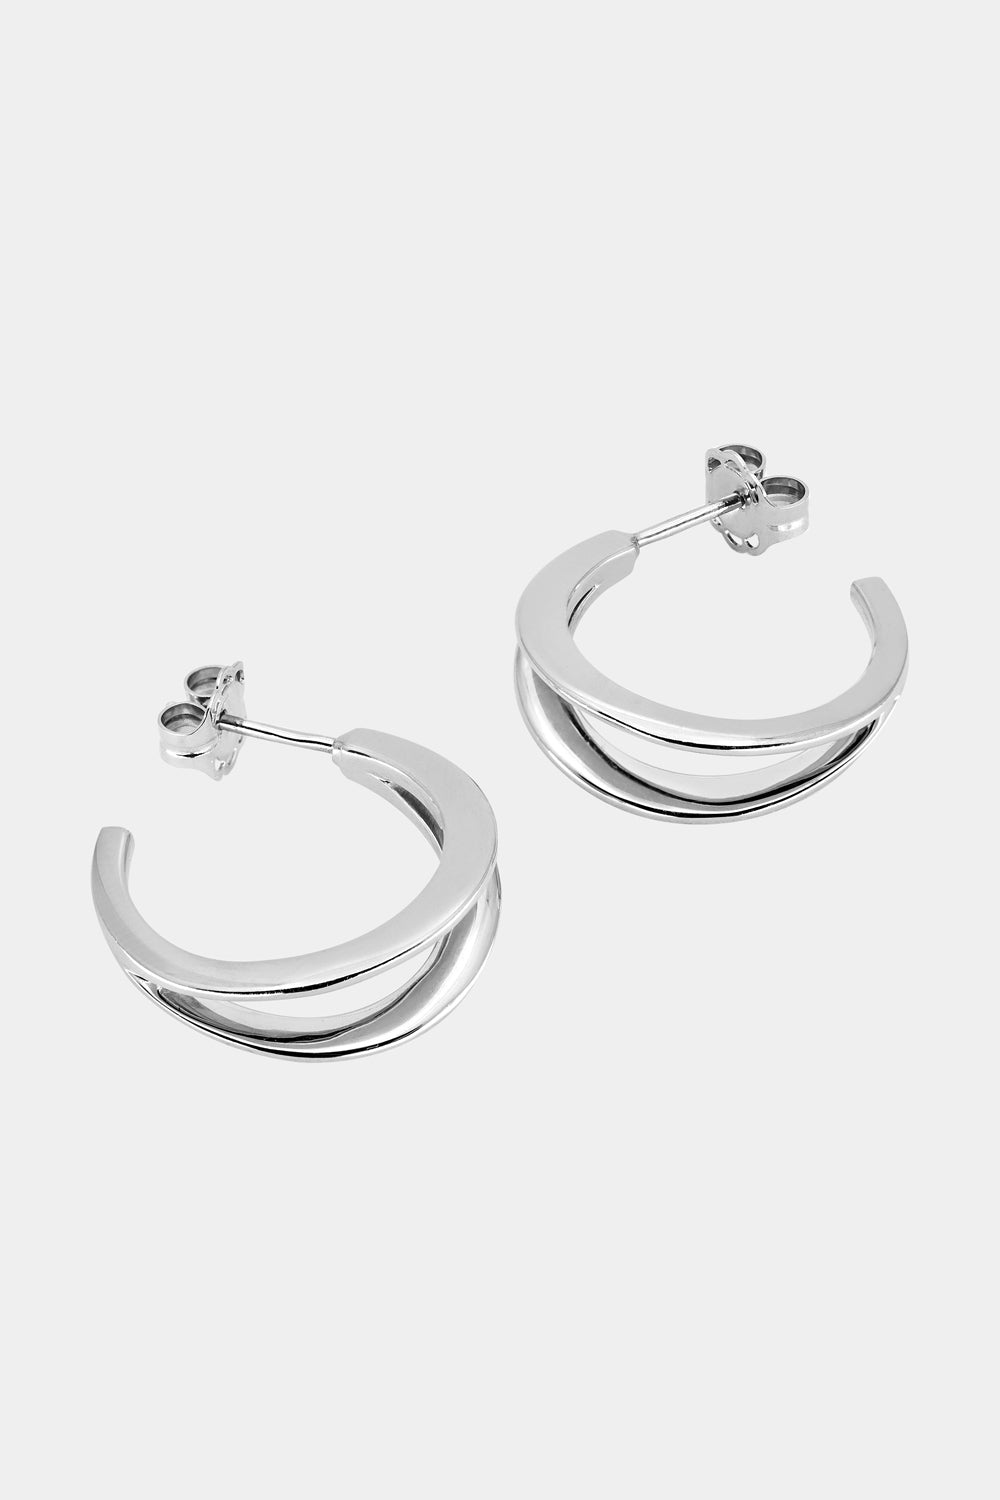 Double Band Hoops | Silver or 9K White Gold, More Options Available| Natasha Schweitzer